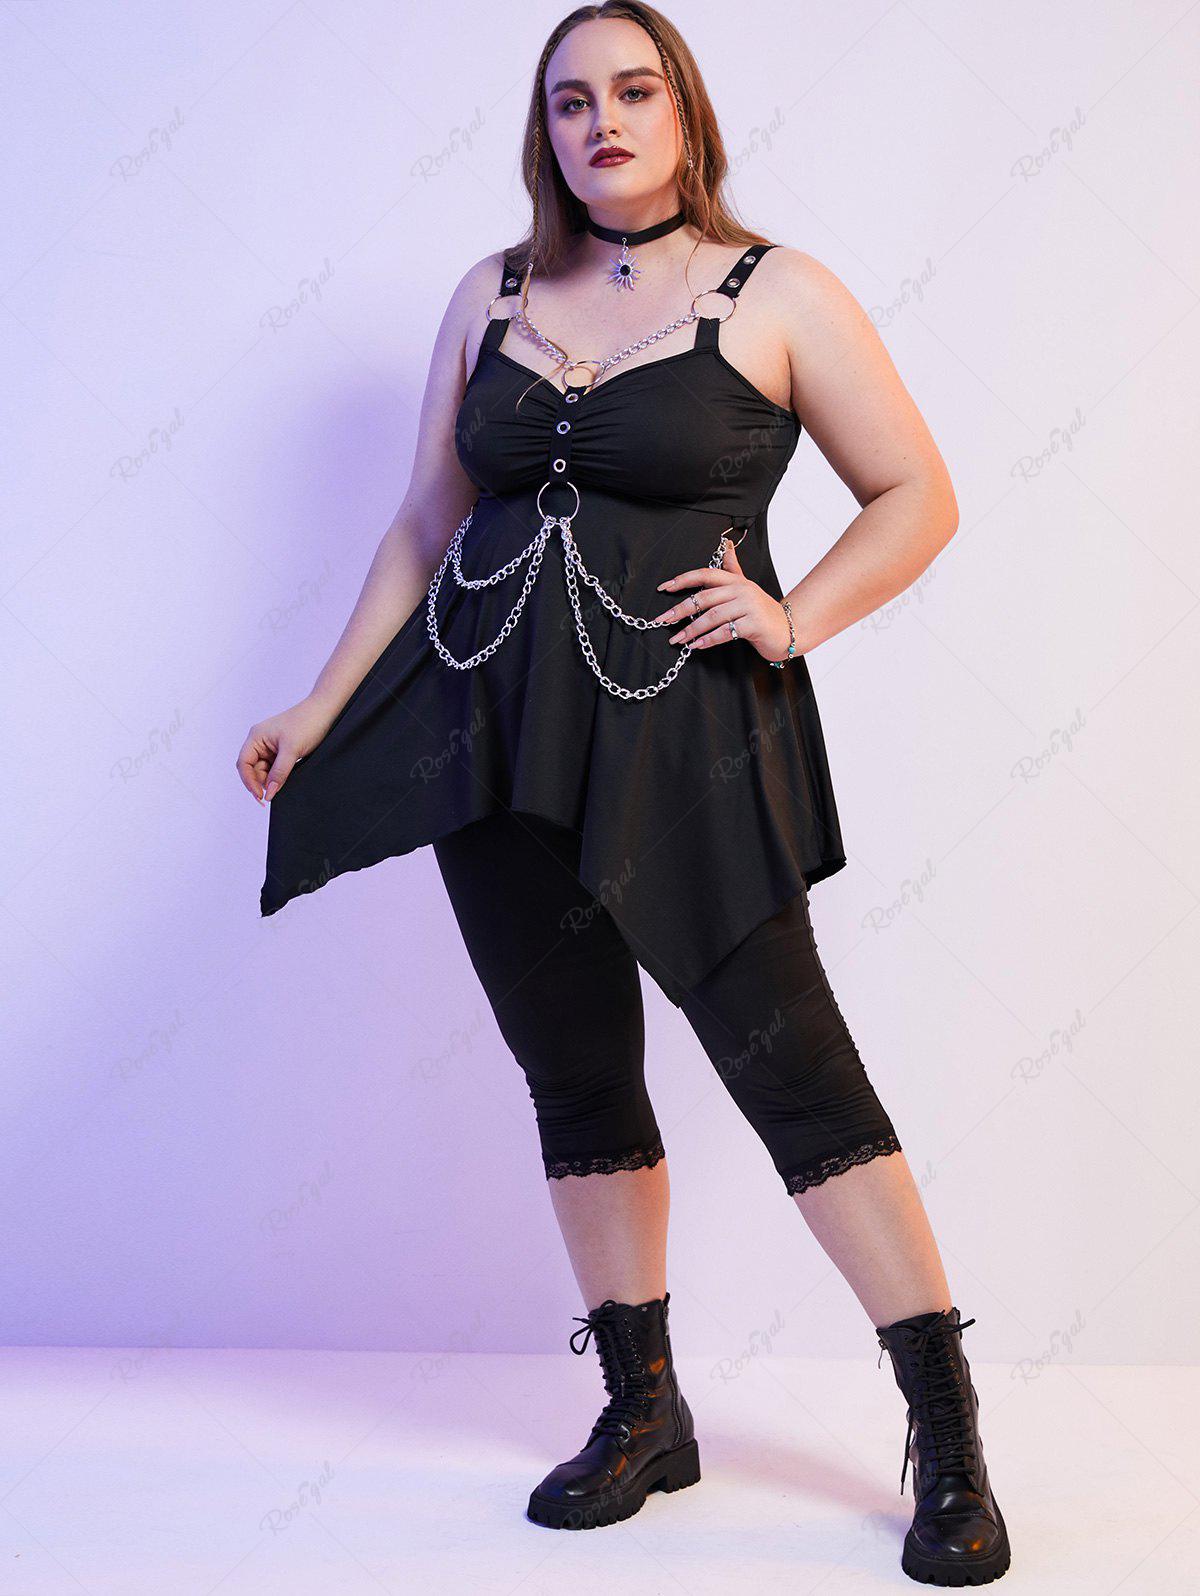 Plus Size Gothic O Ring Chains Handkerchief Tank Top [39% OFF